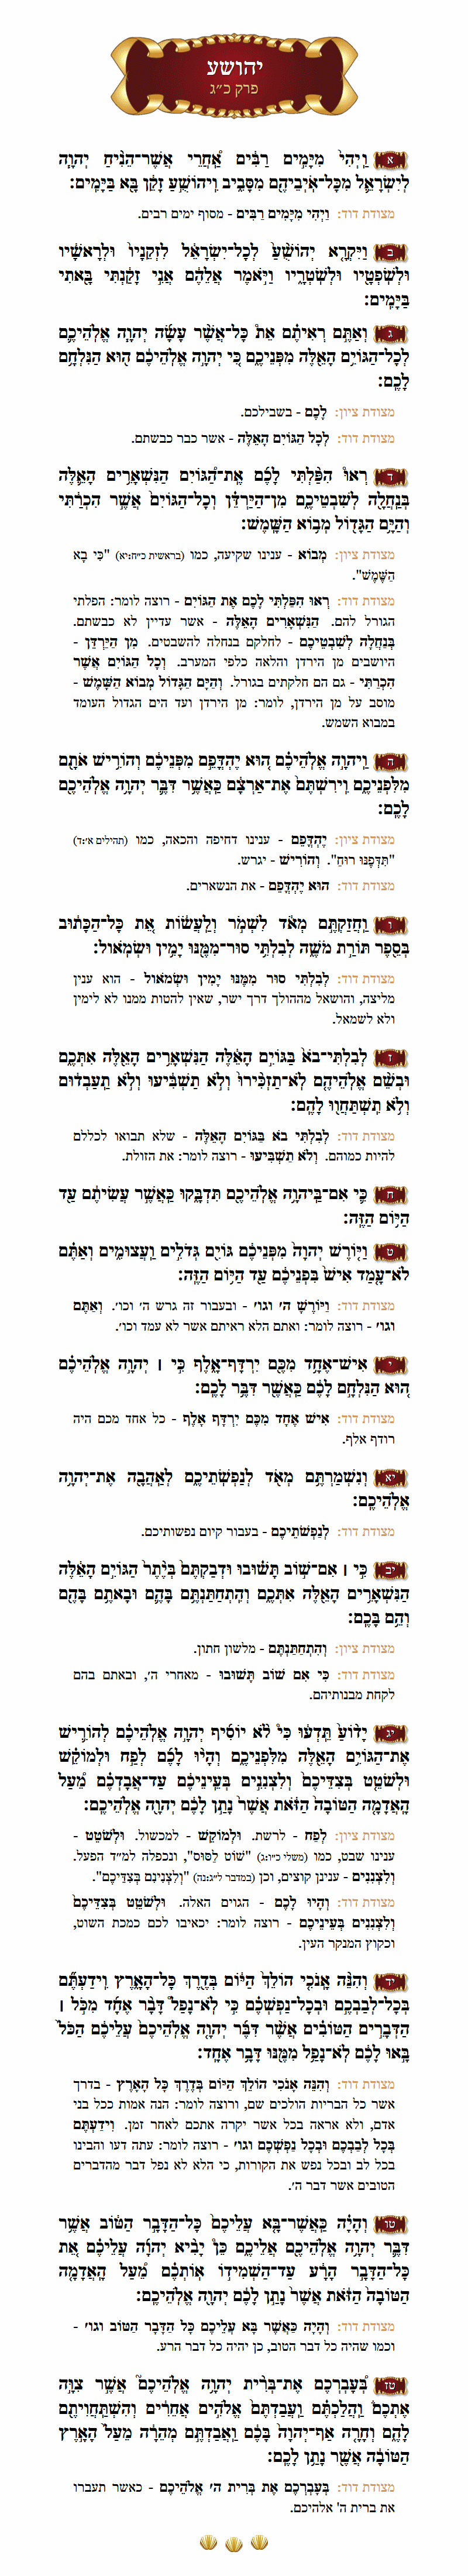 Sefer Yehoshua Chapter 23 with commentary